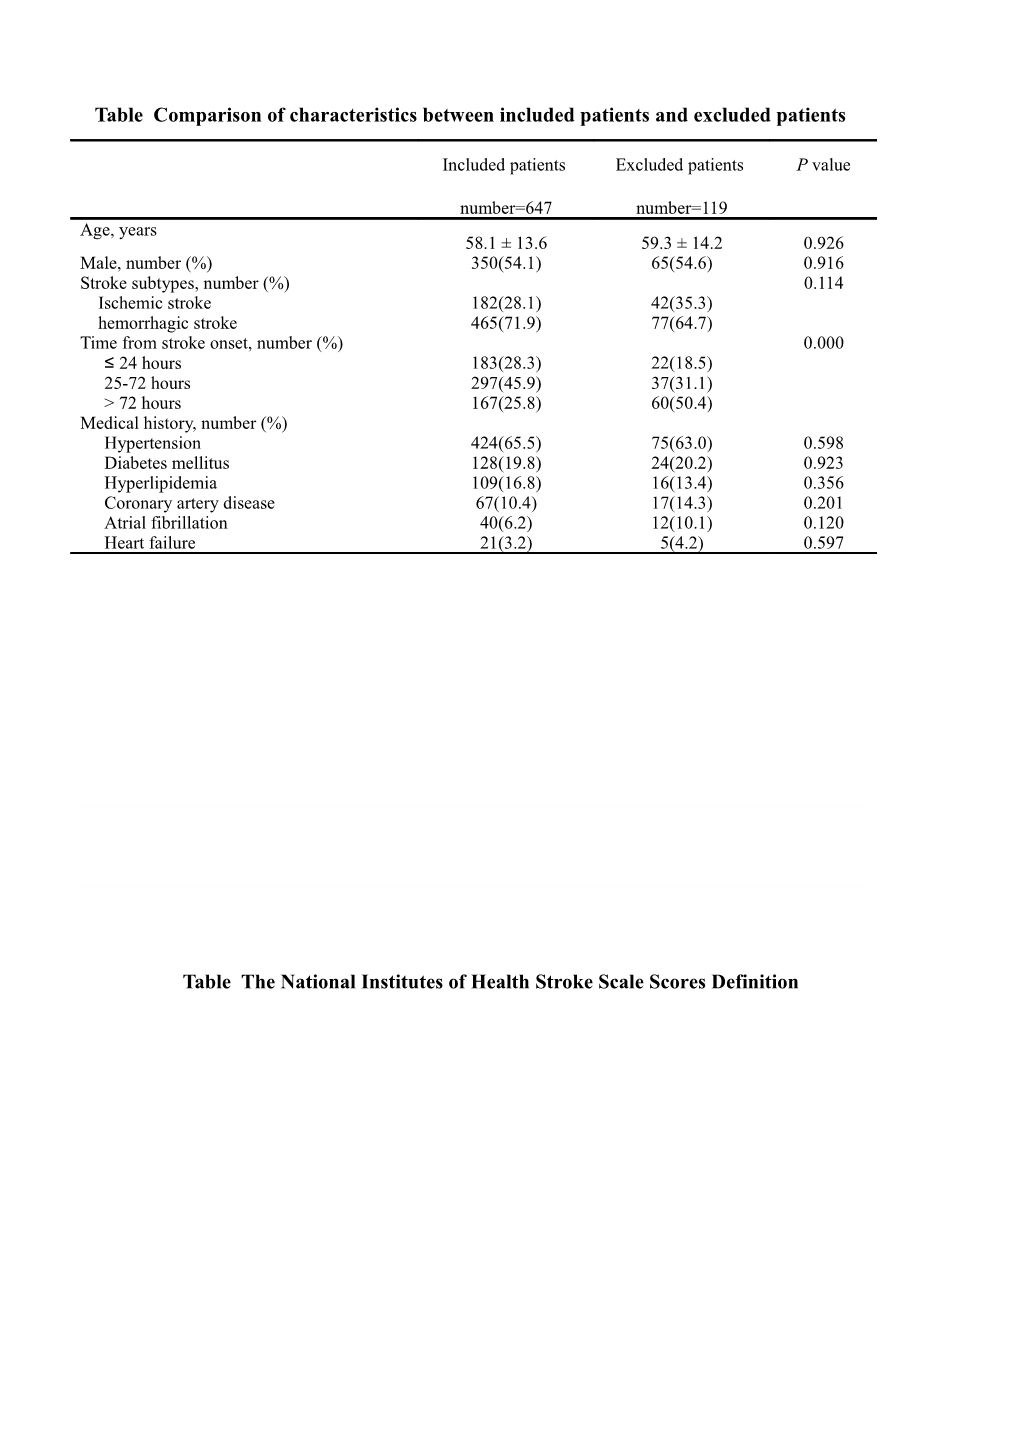 Table Comparison of Characteristics Between Included Patients and Excluded Patients